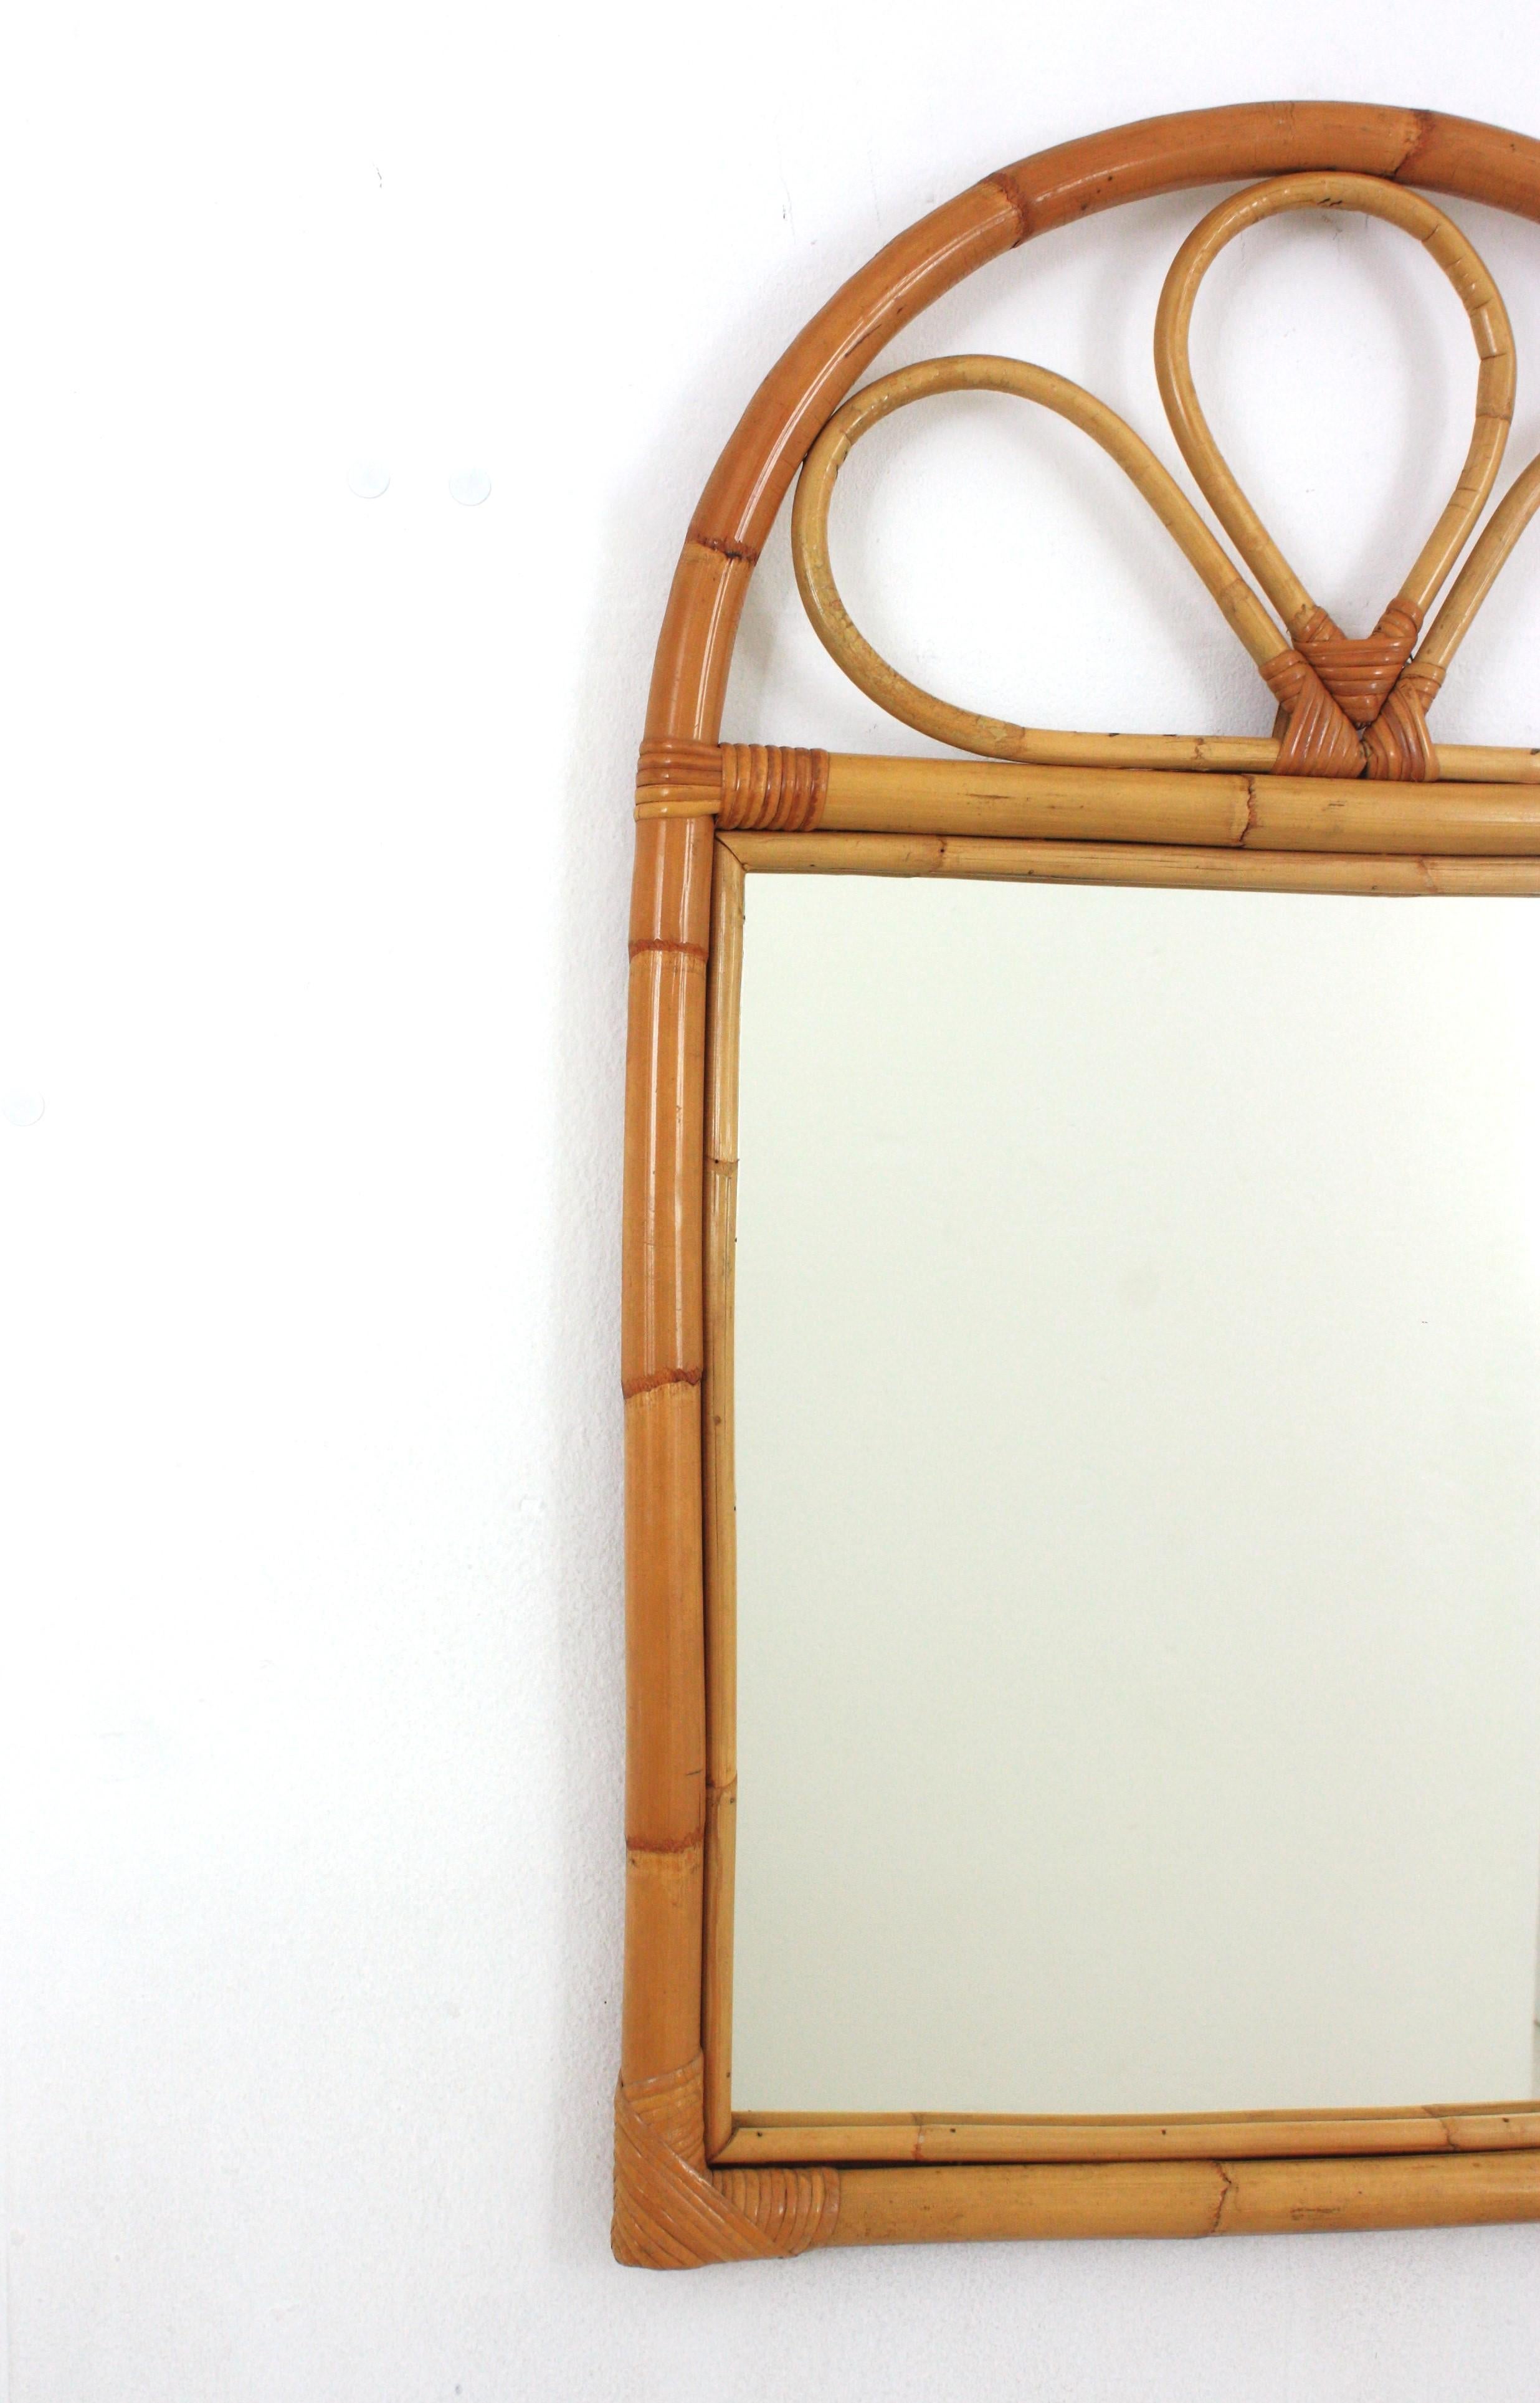 20th Century Spanish Rattan Bamboo Mirror with Arched Top, 1960s For Sale